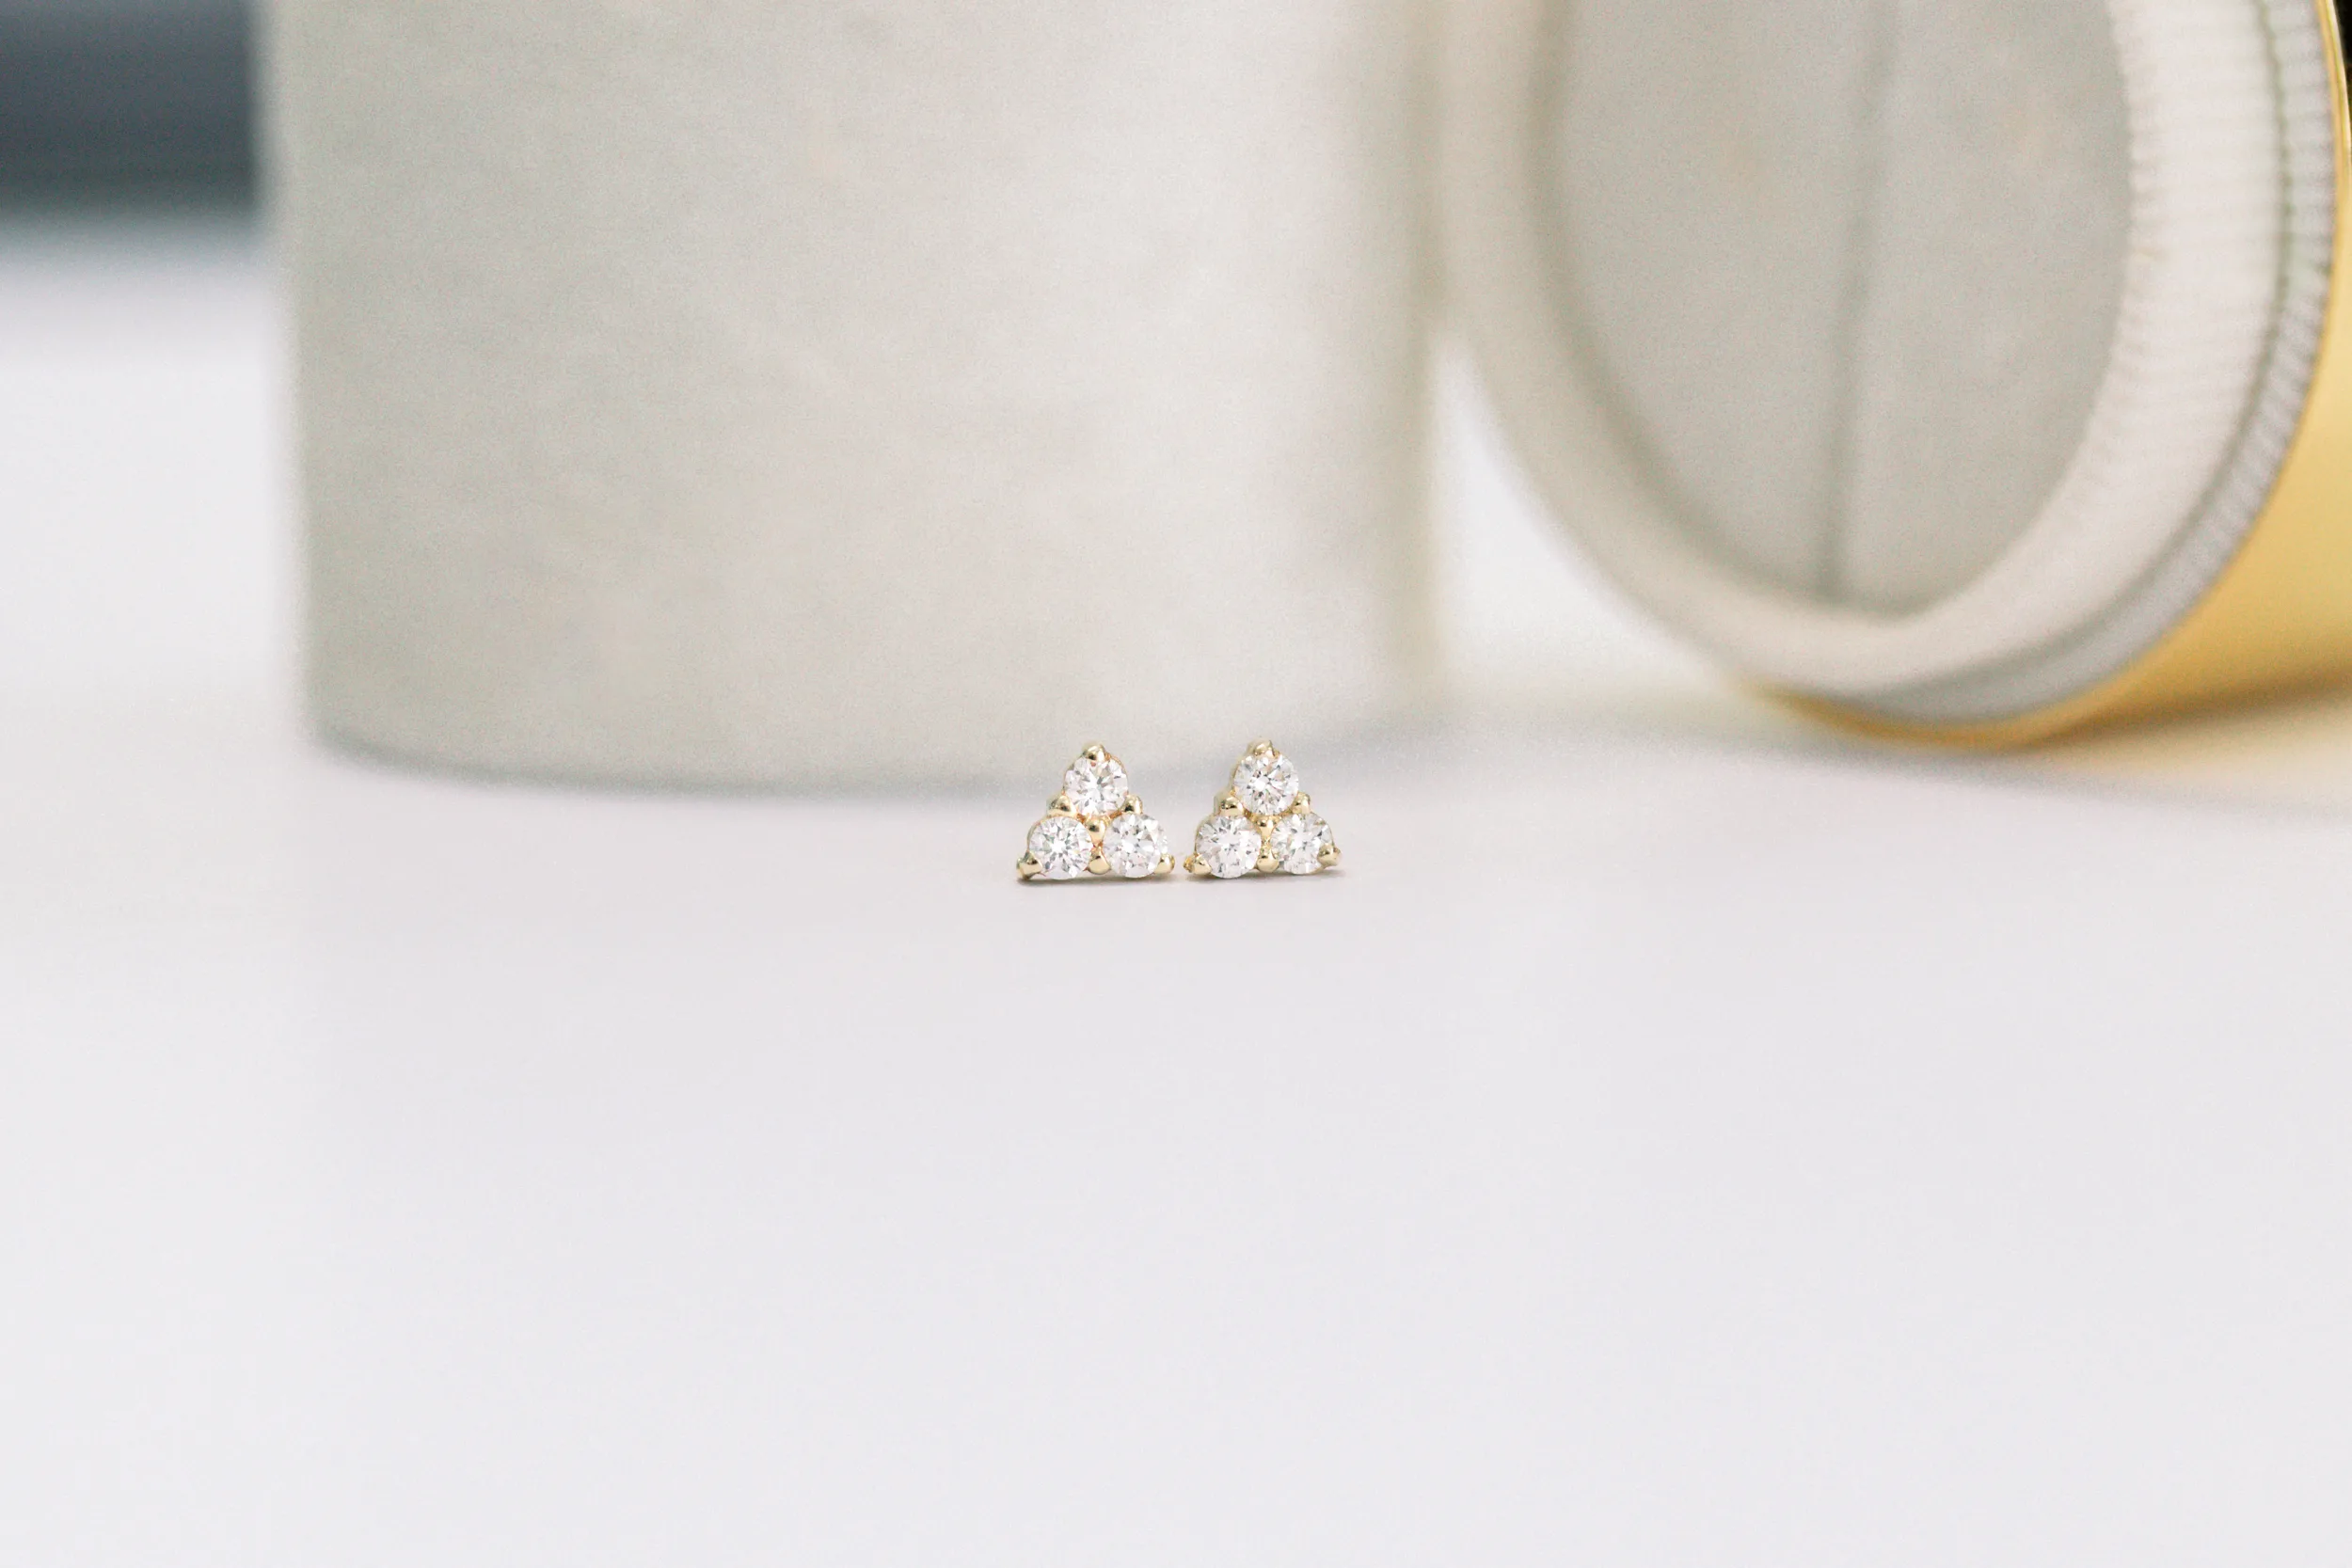 14k Yellow Gold 0.18ctw Three Stone Diamond Earrings in 14k Yellow Gold featuring Hand Selected 0.18 Carat Round Diamonds (Main View)